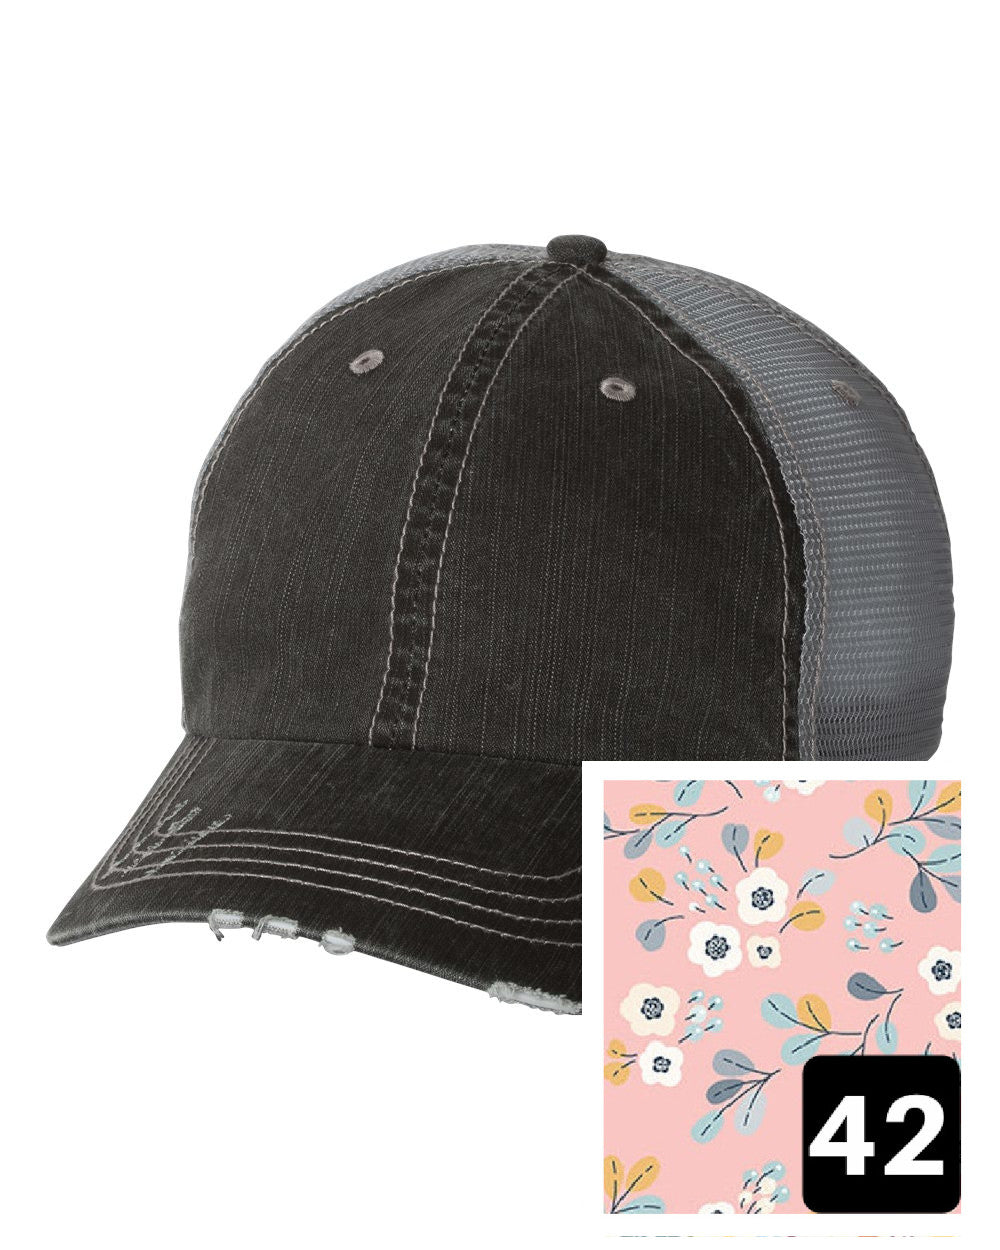 gray distressed trucker hat with light blue and pink mosaic fabric state of North Dakota